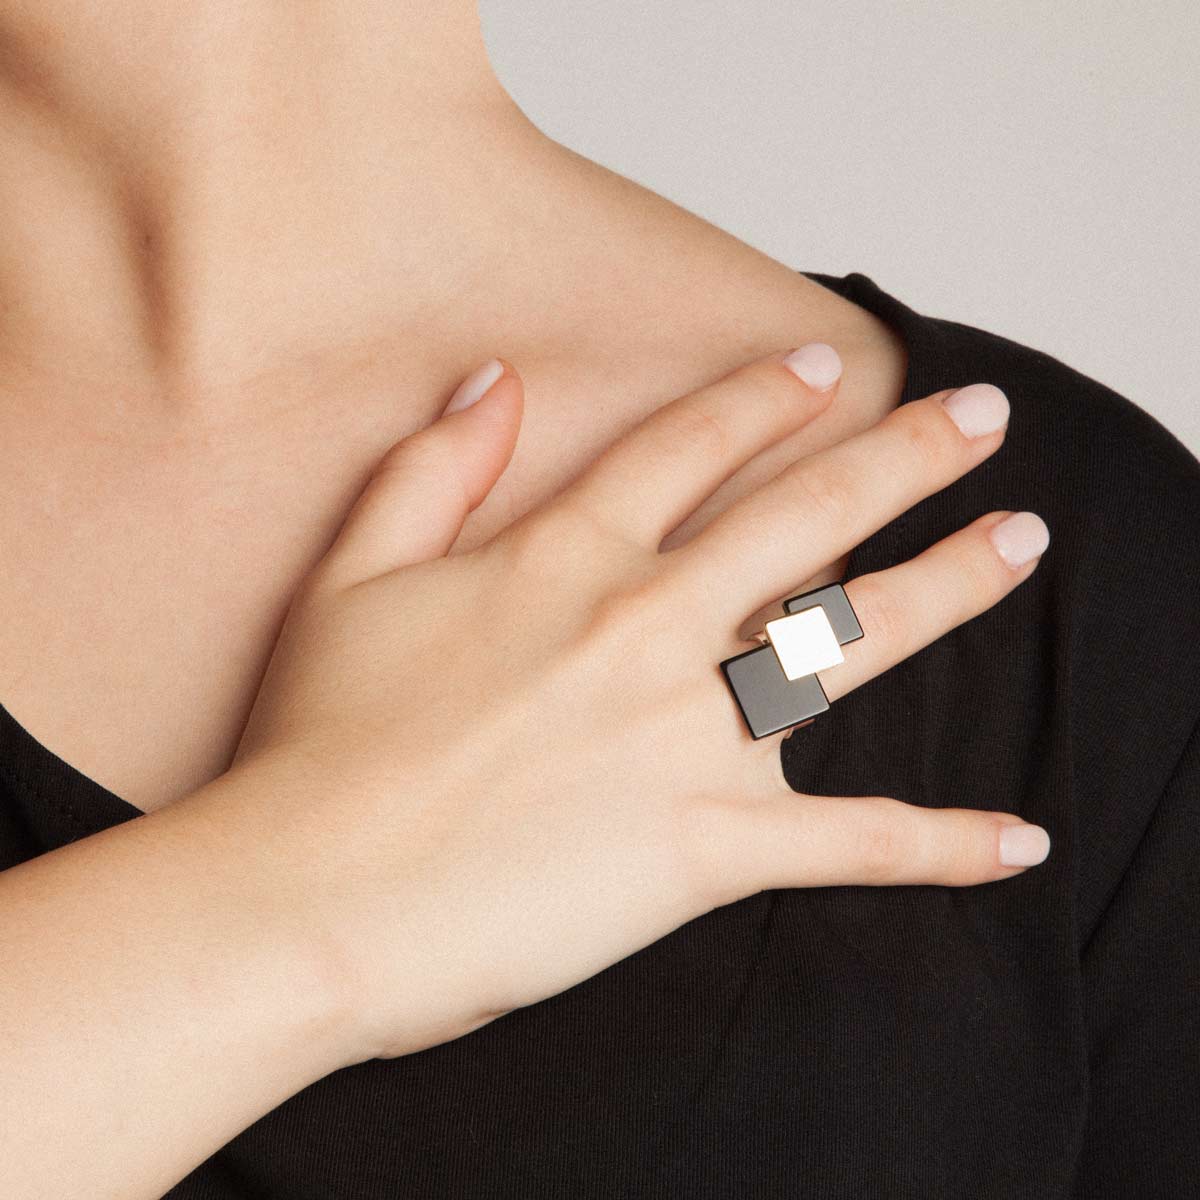 Zoi handcrafted ring in 9k or 18k gold, sterling silver and onyx designed by Belen Bajo m1